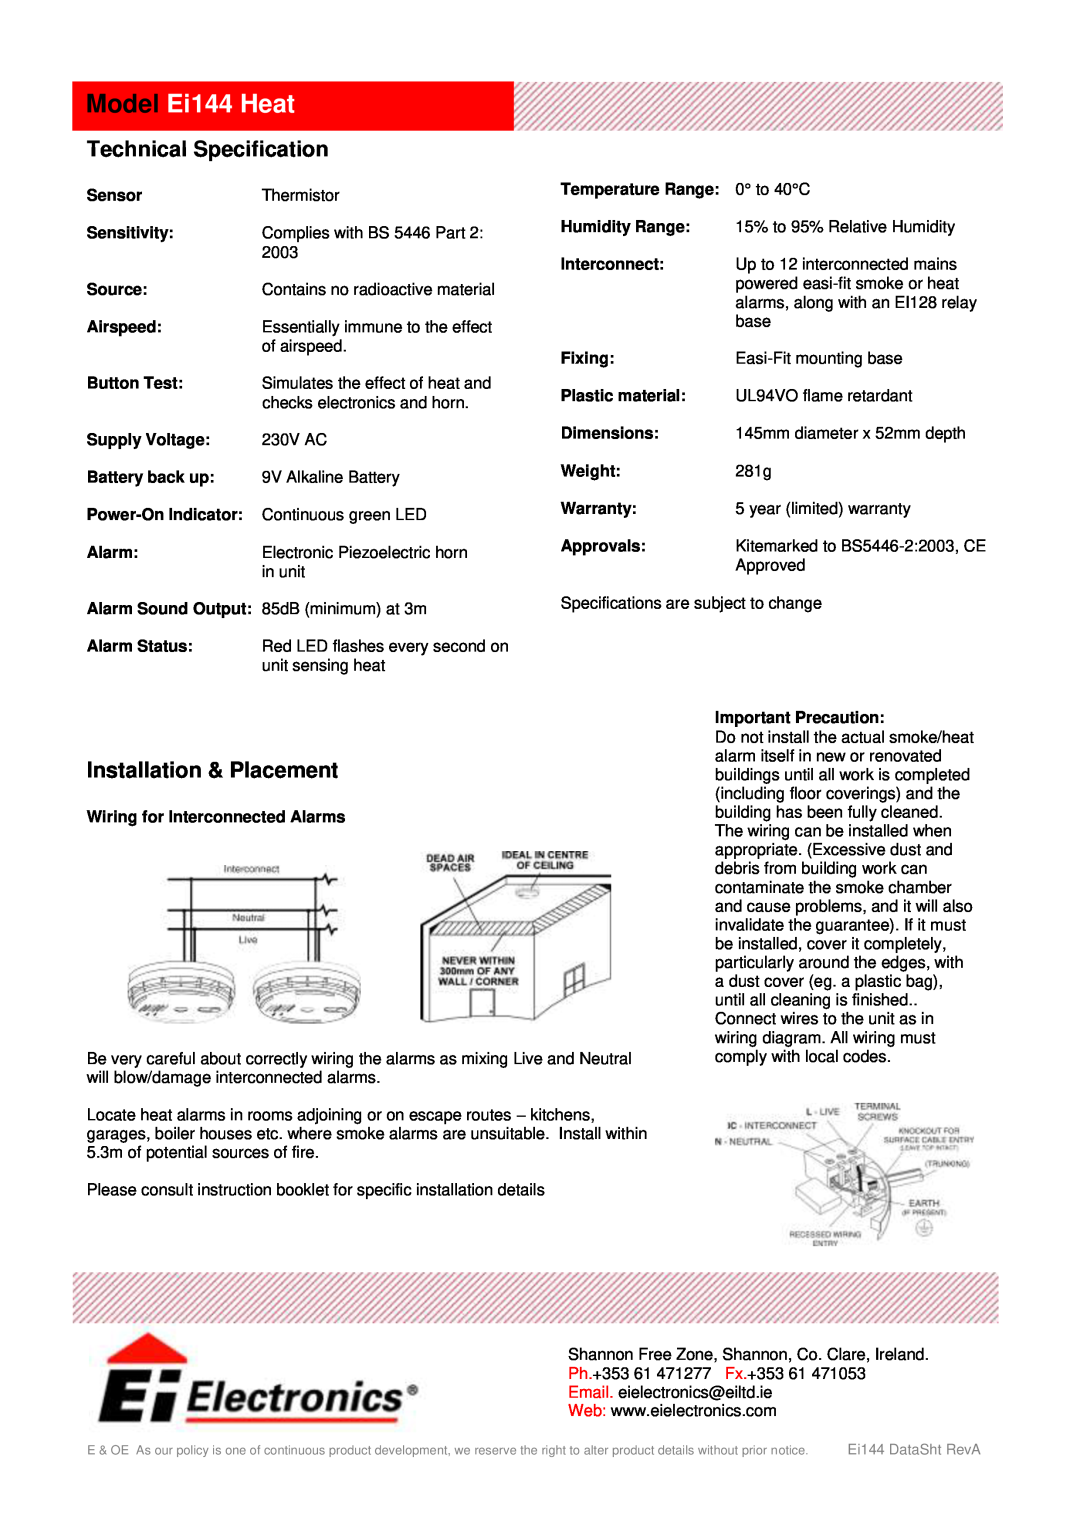 Ei Electronics manual Technical Specification, Installation & Placement, Model Ei144 Heat 